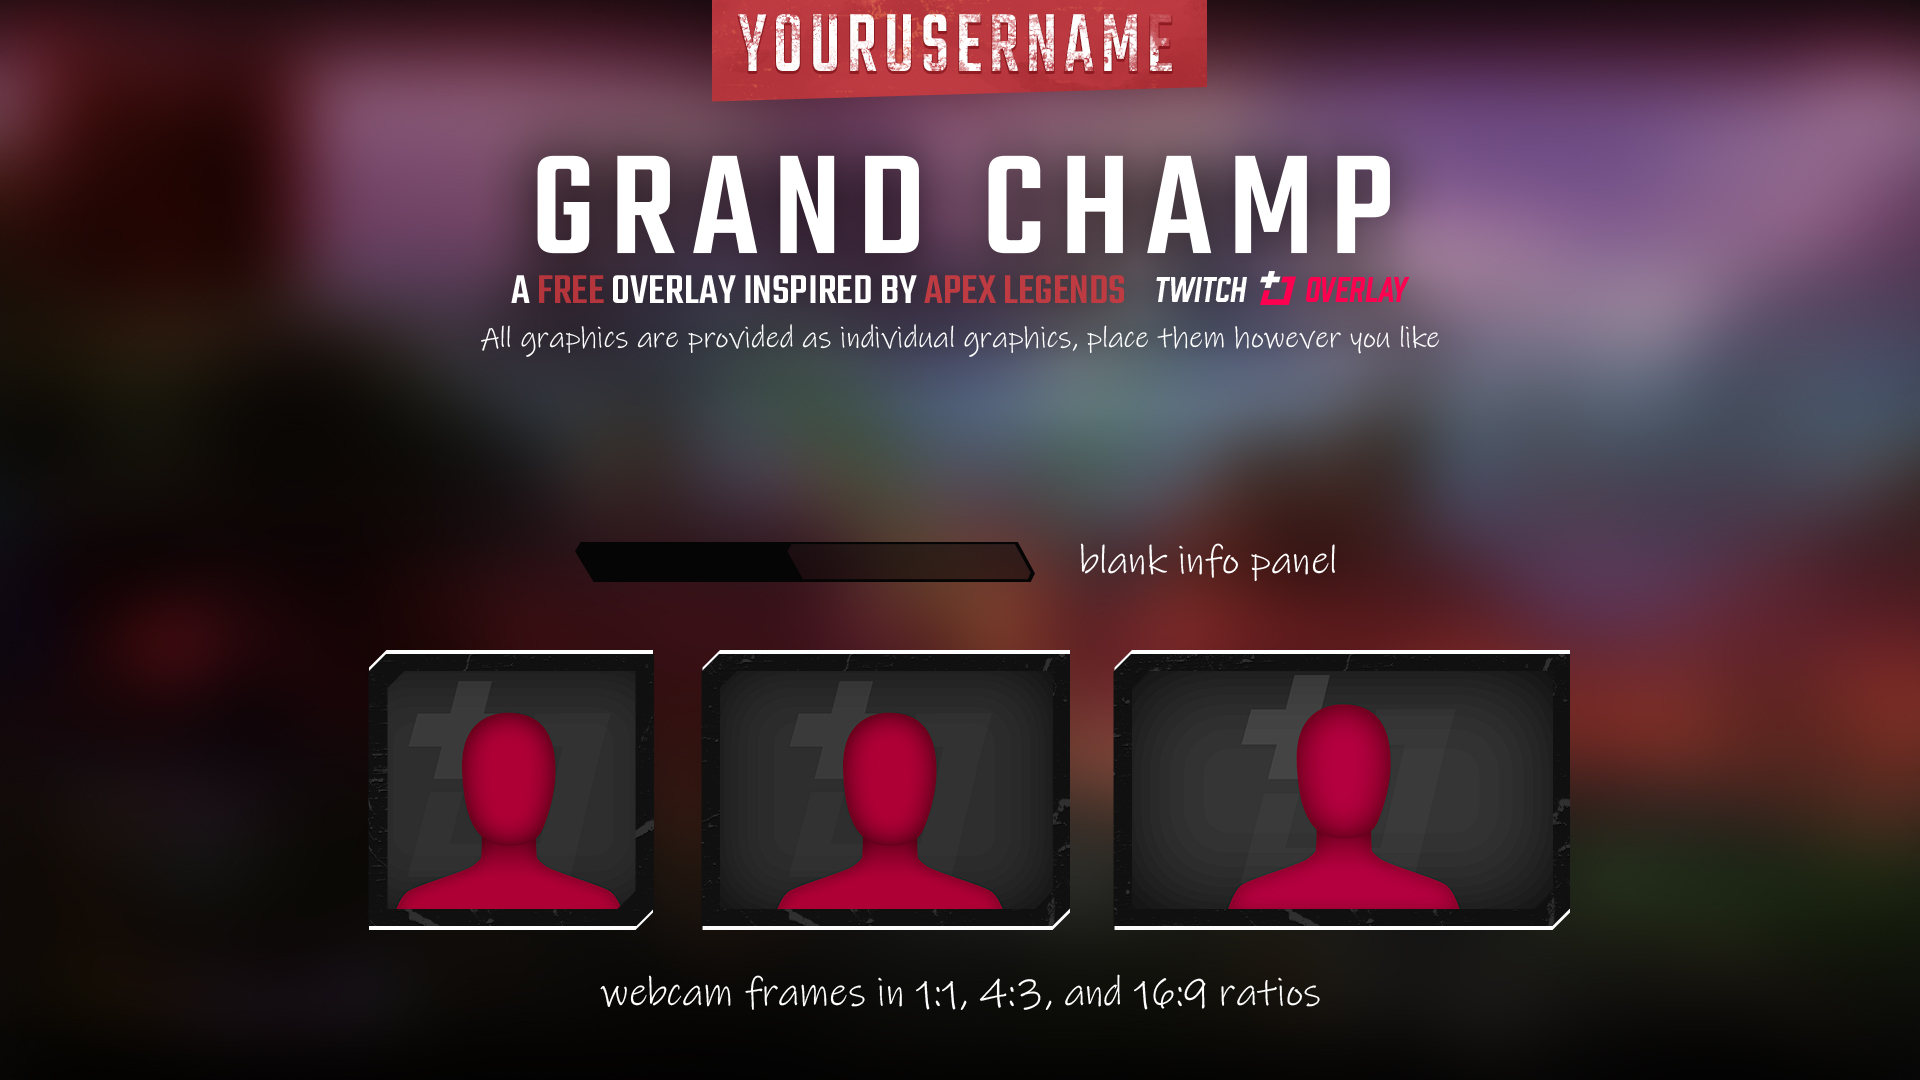 Grand Champ Free Apex Legends Twitch Overlay Twitch Overlay